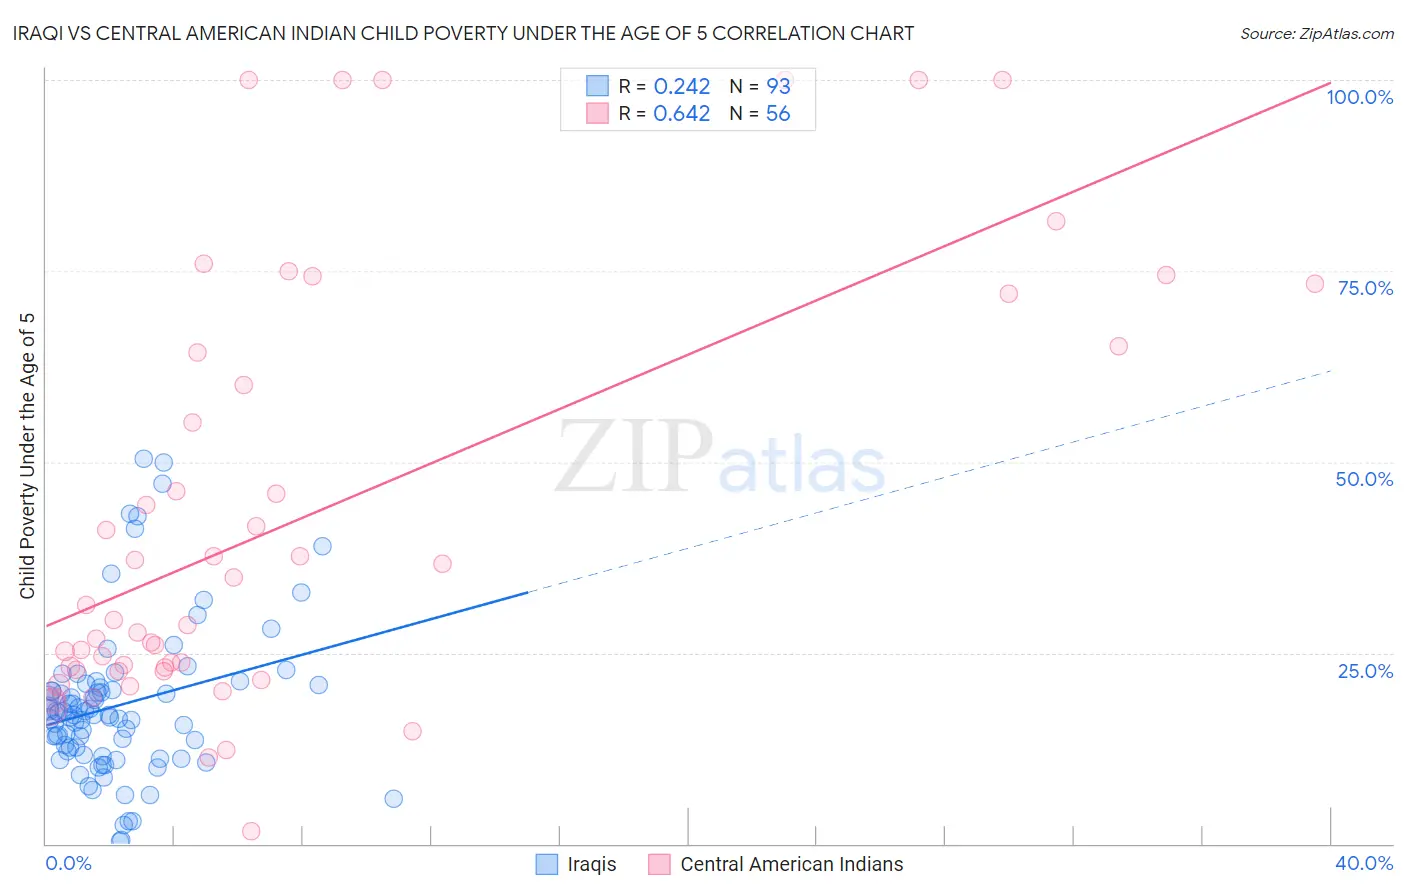 Iraqi vs Central American Indian Child Poverty Under the Age of 5